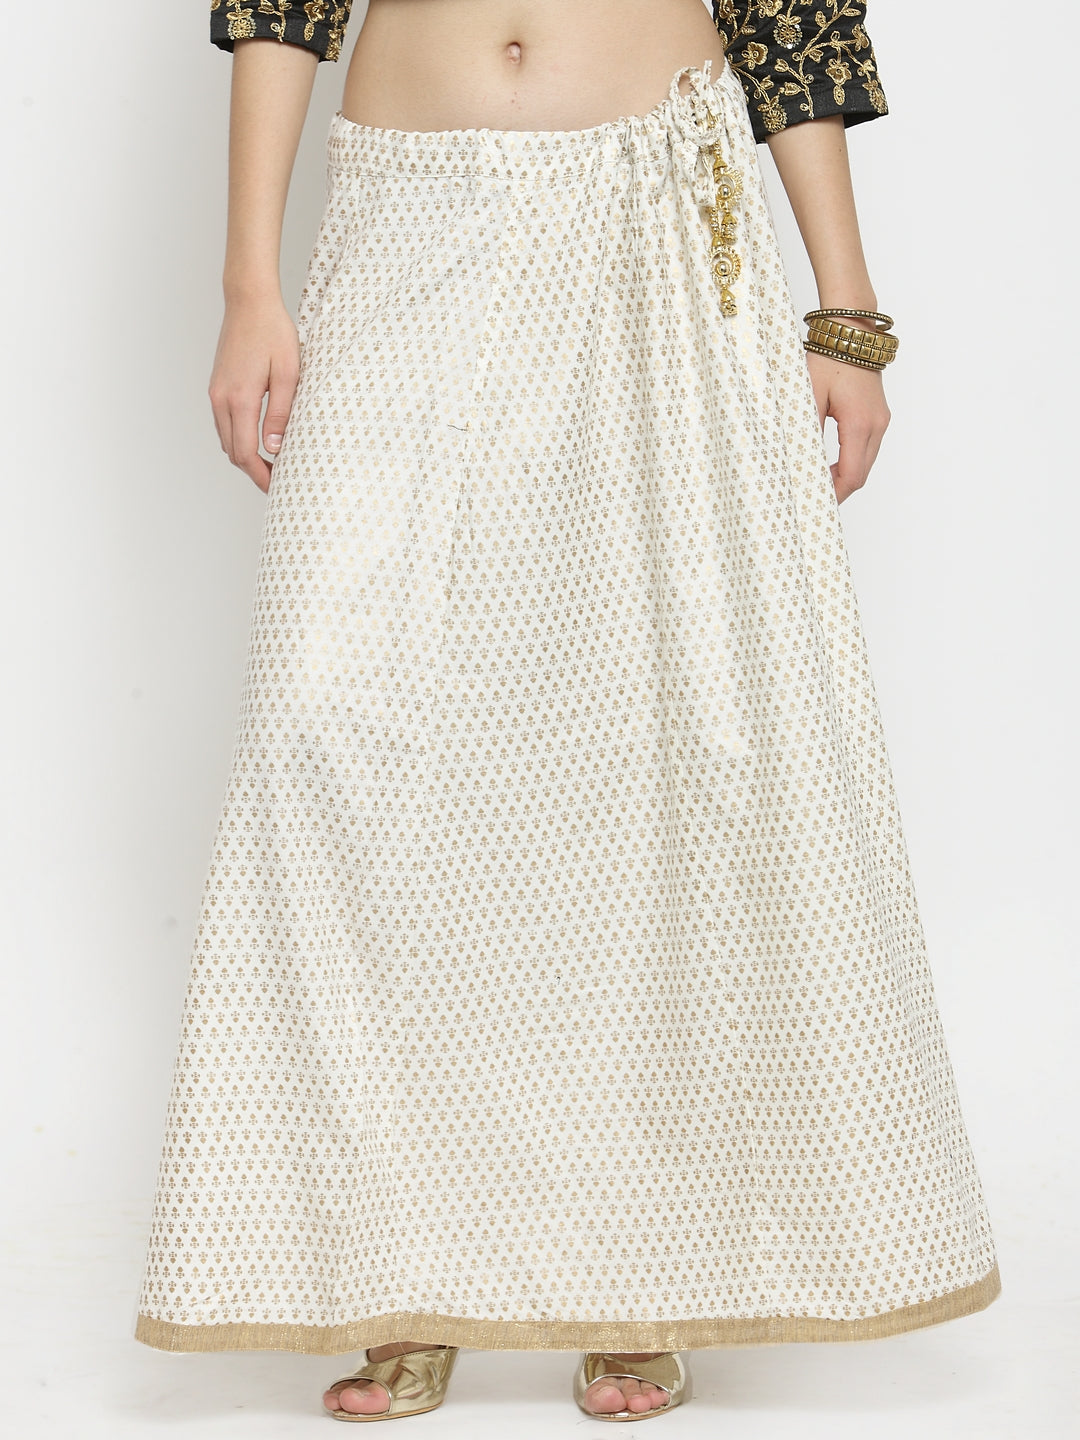 Women's Off-White Printed Rayon Maxi Skirt - Wahe-NOOR